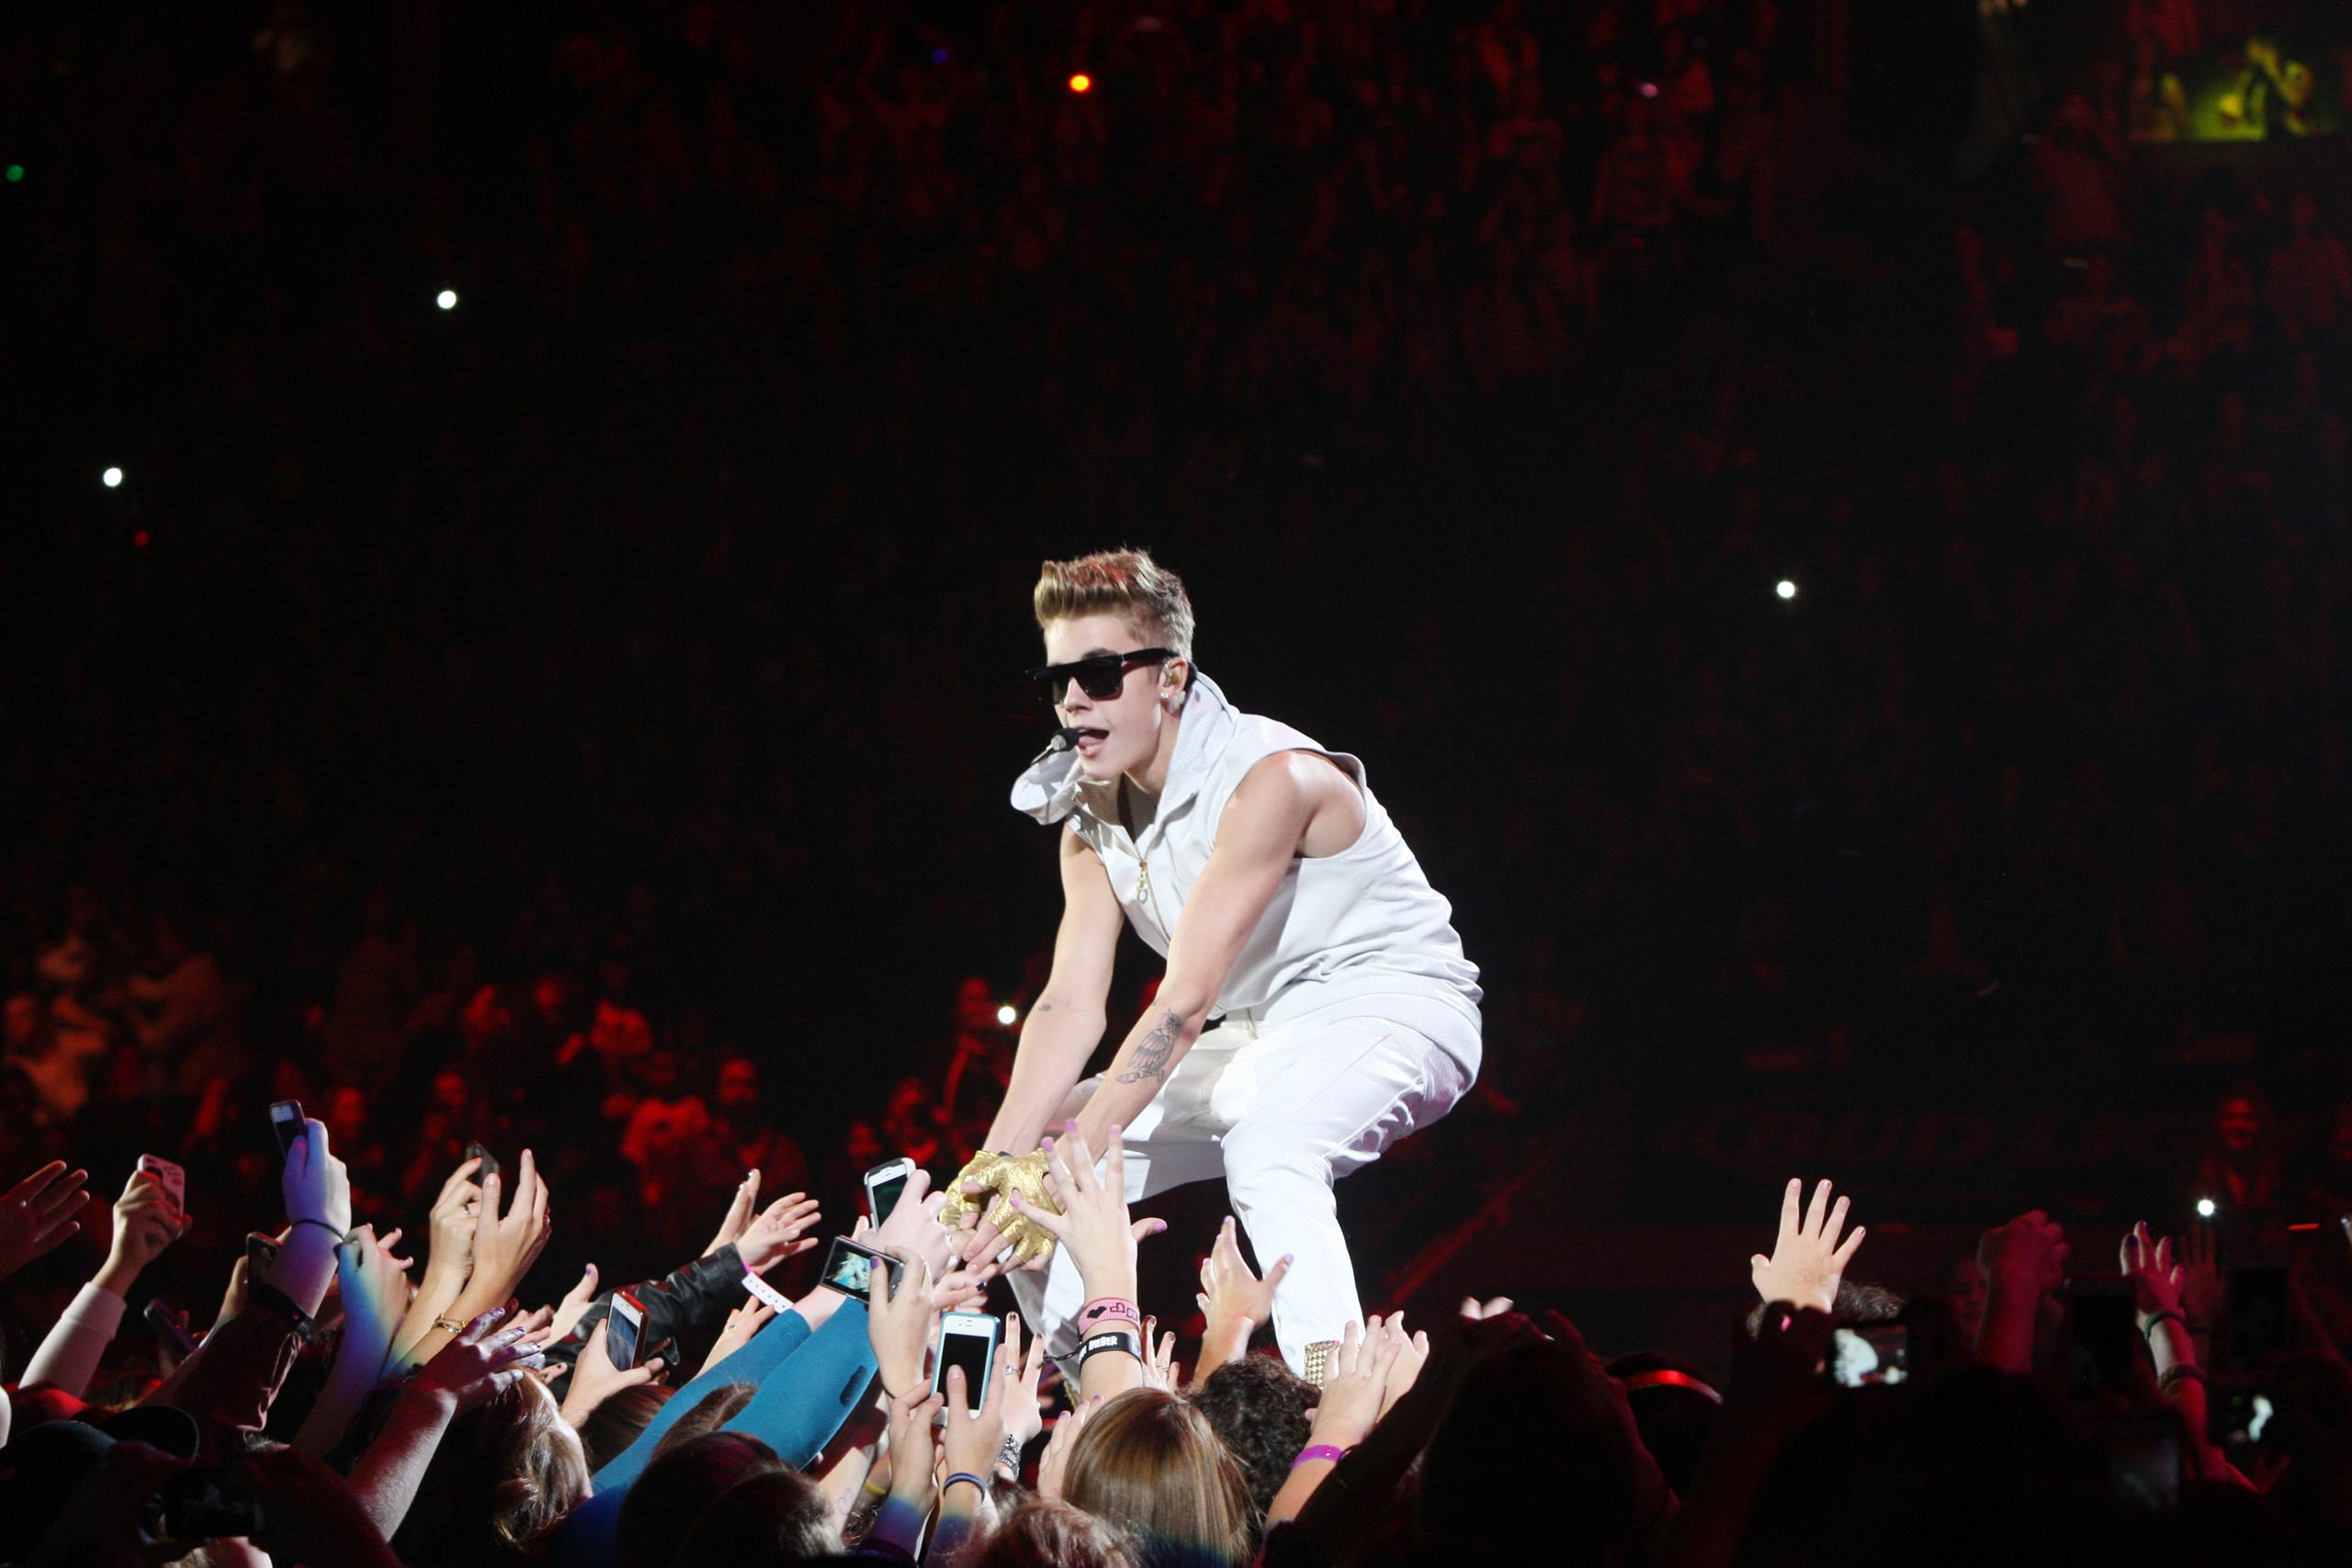 Justin Bieber performs at the Izod Center in East Rutherford, NJ in 2012.